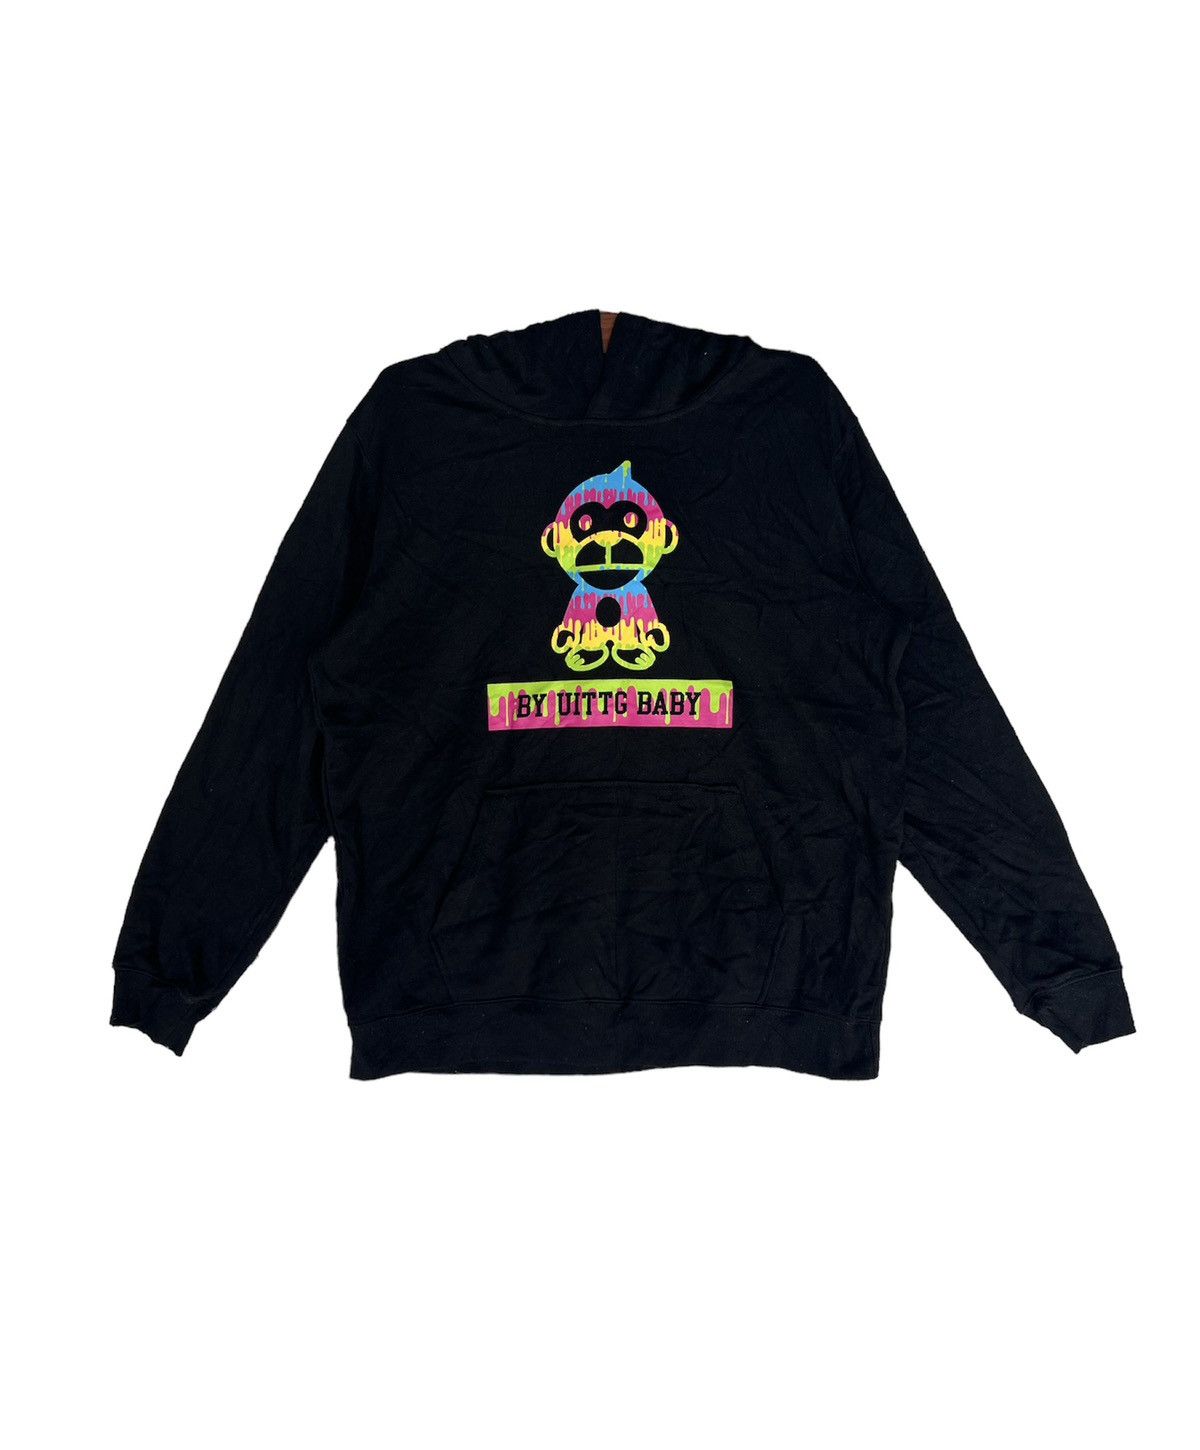 Japanese Brand HOODIE BY UITTG BABY MULTICOLOUR Size US L / EU 52-54 / 3 - 1 Preview